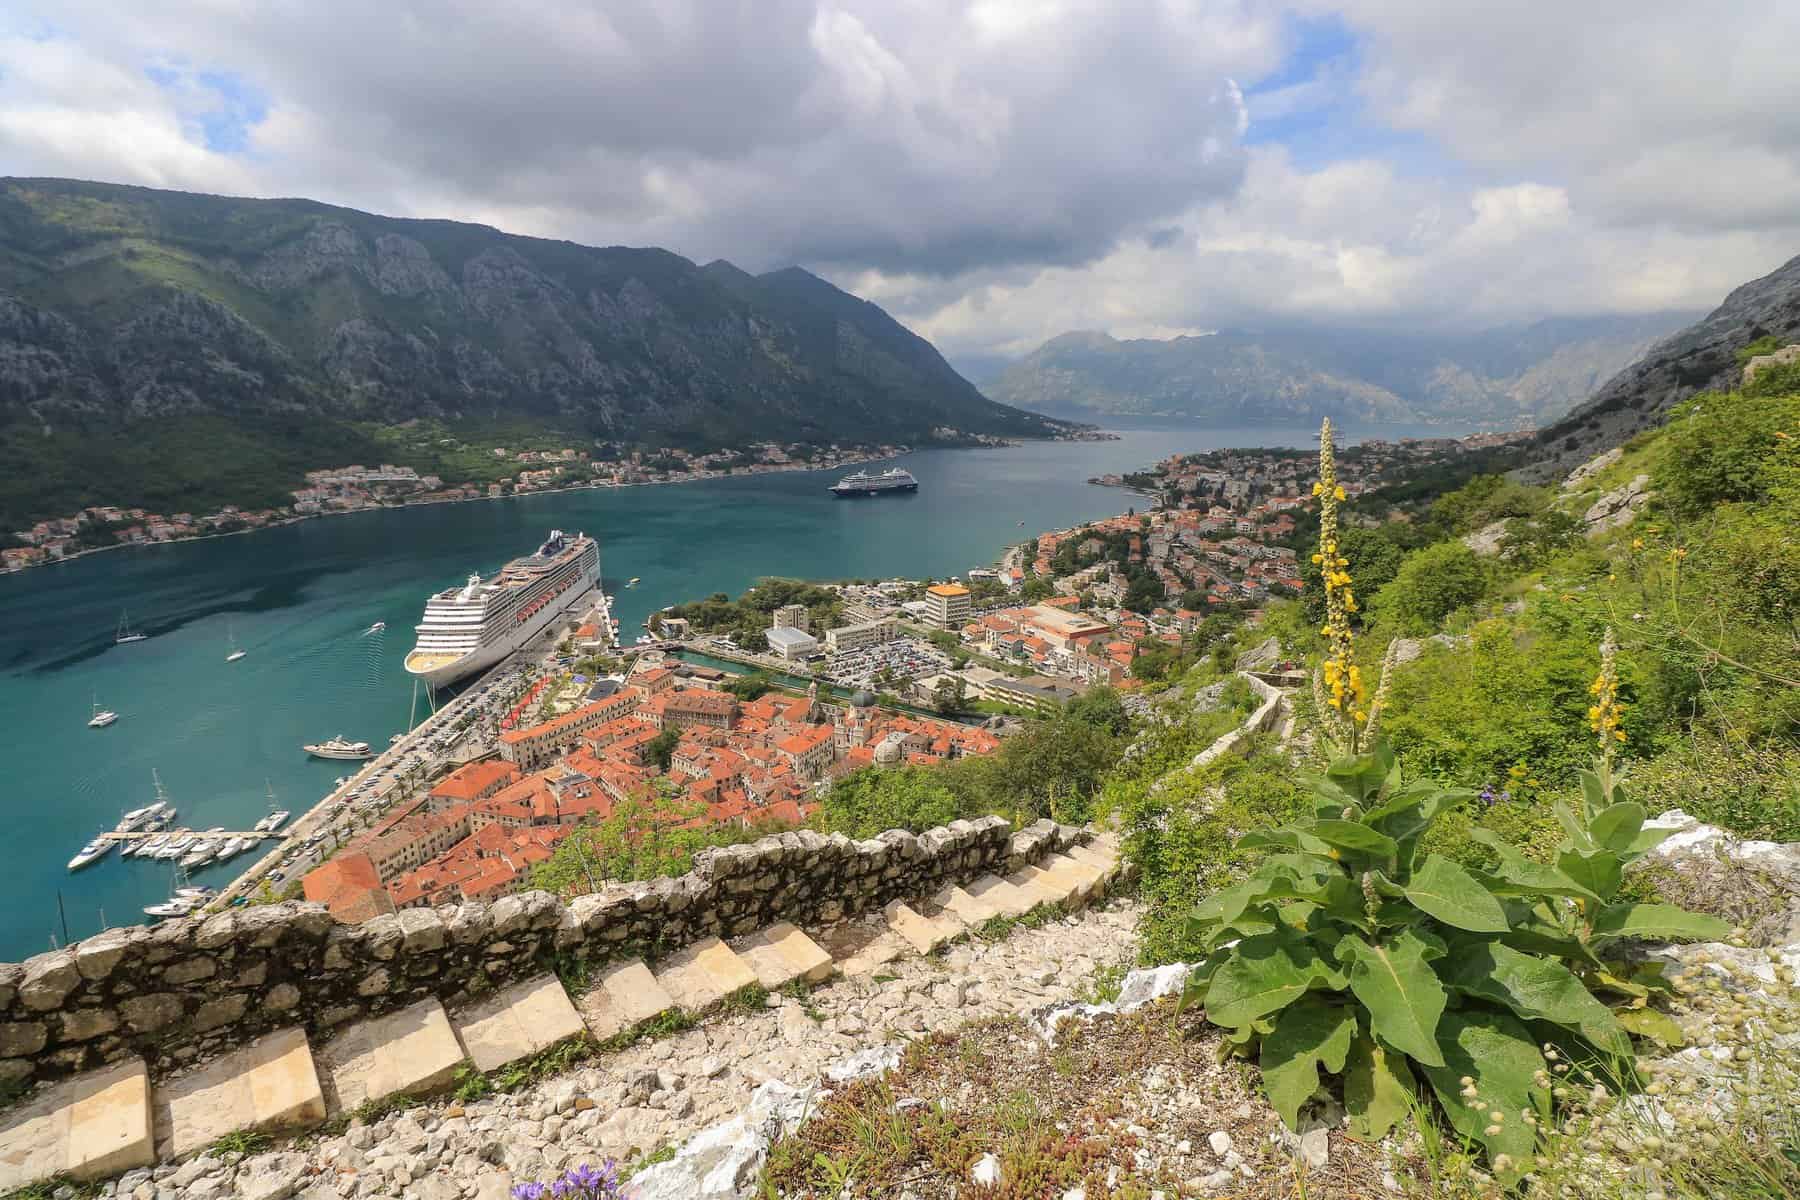 View of the Bay of Kotor from the hike up t San Giovanni Fortress.